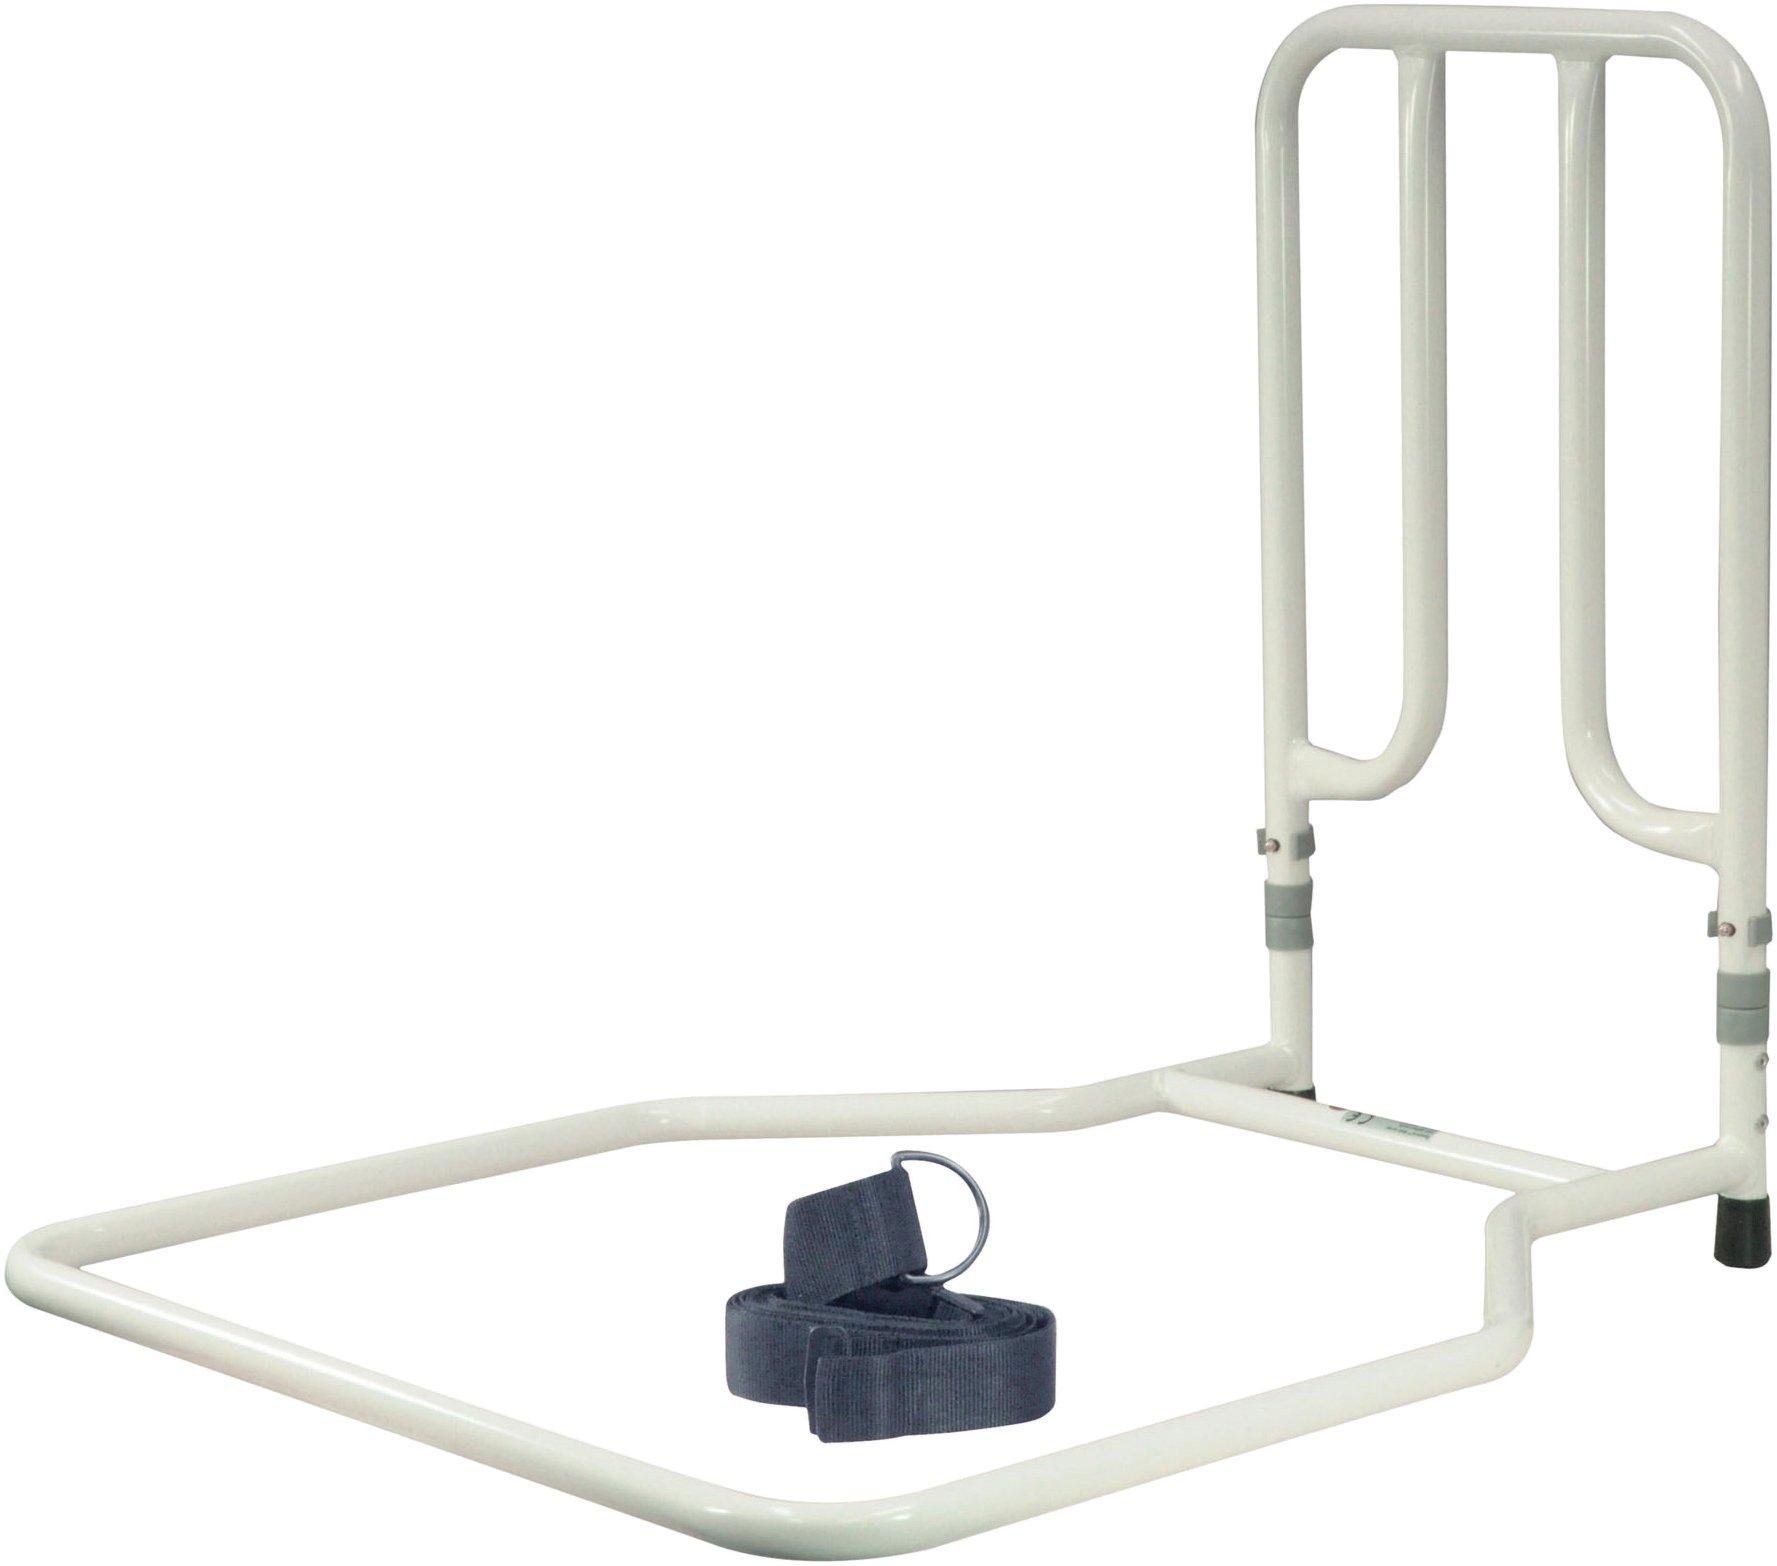 Solo Fixed Height Bed Transfer Aid